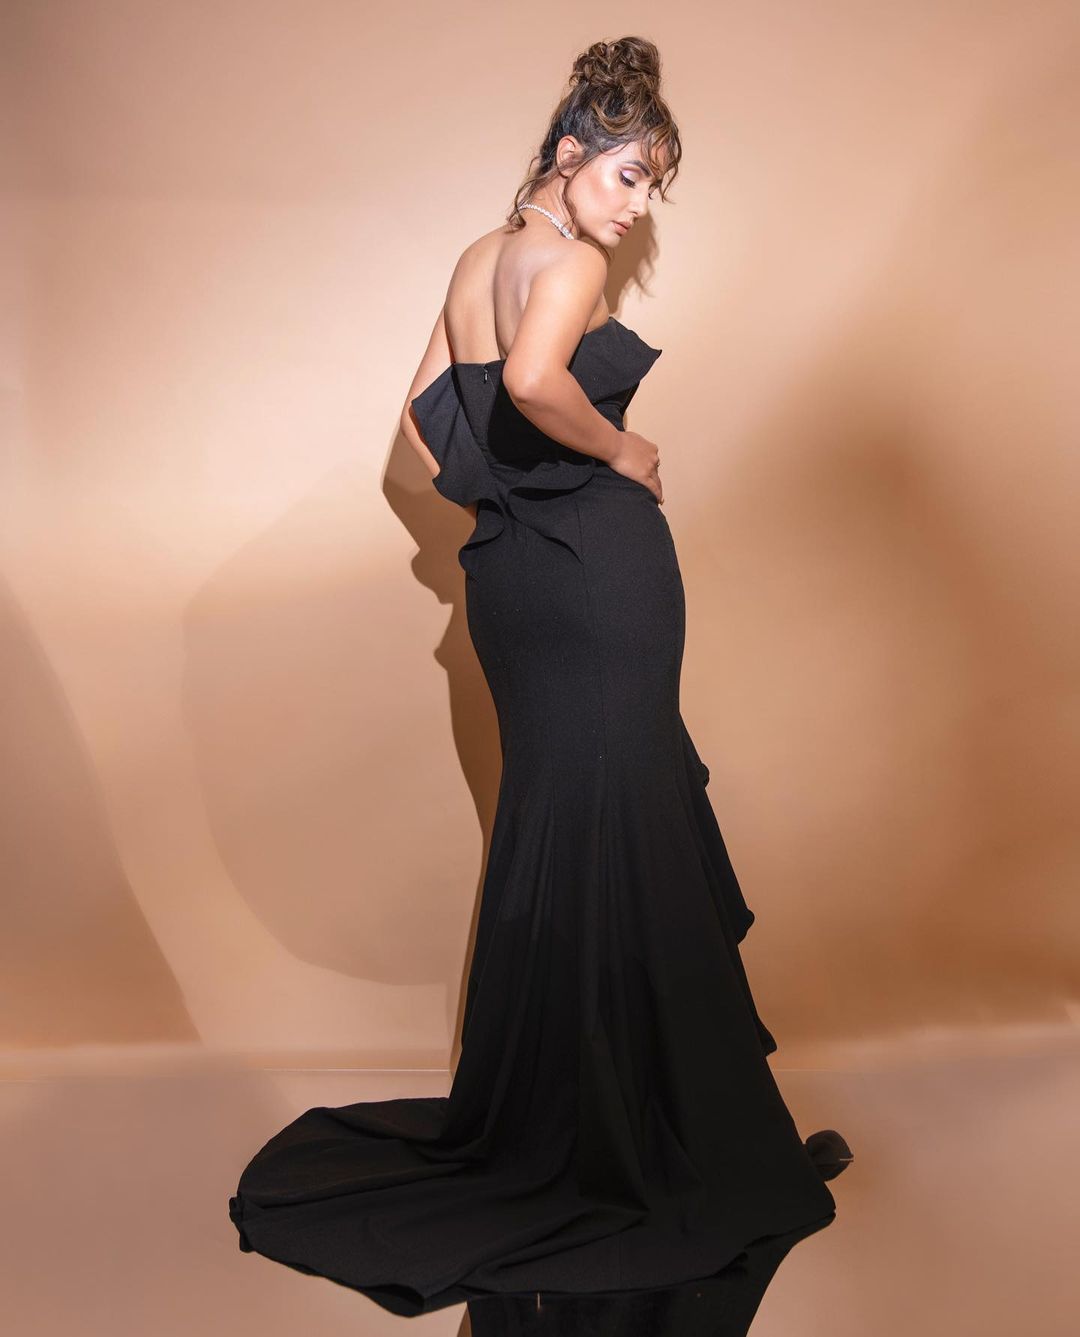 Hina Khan displays her curves in the graceful gown